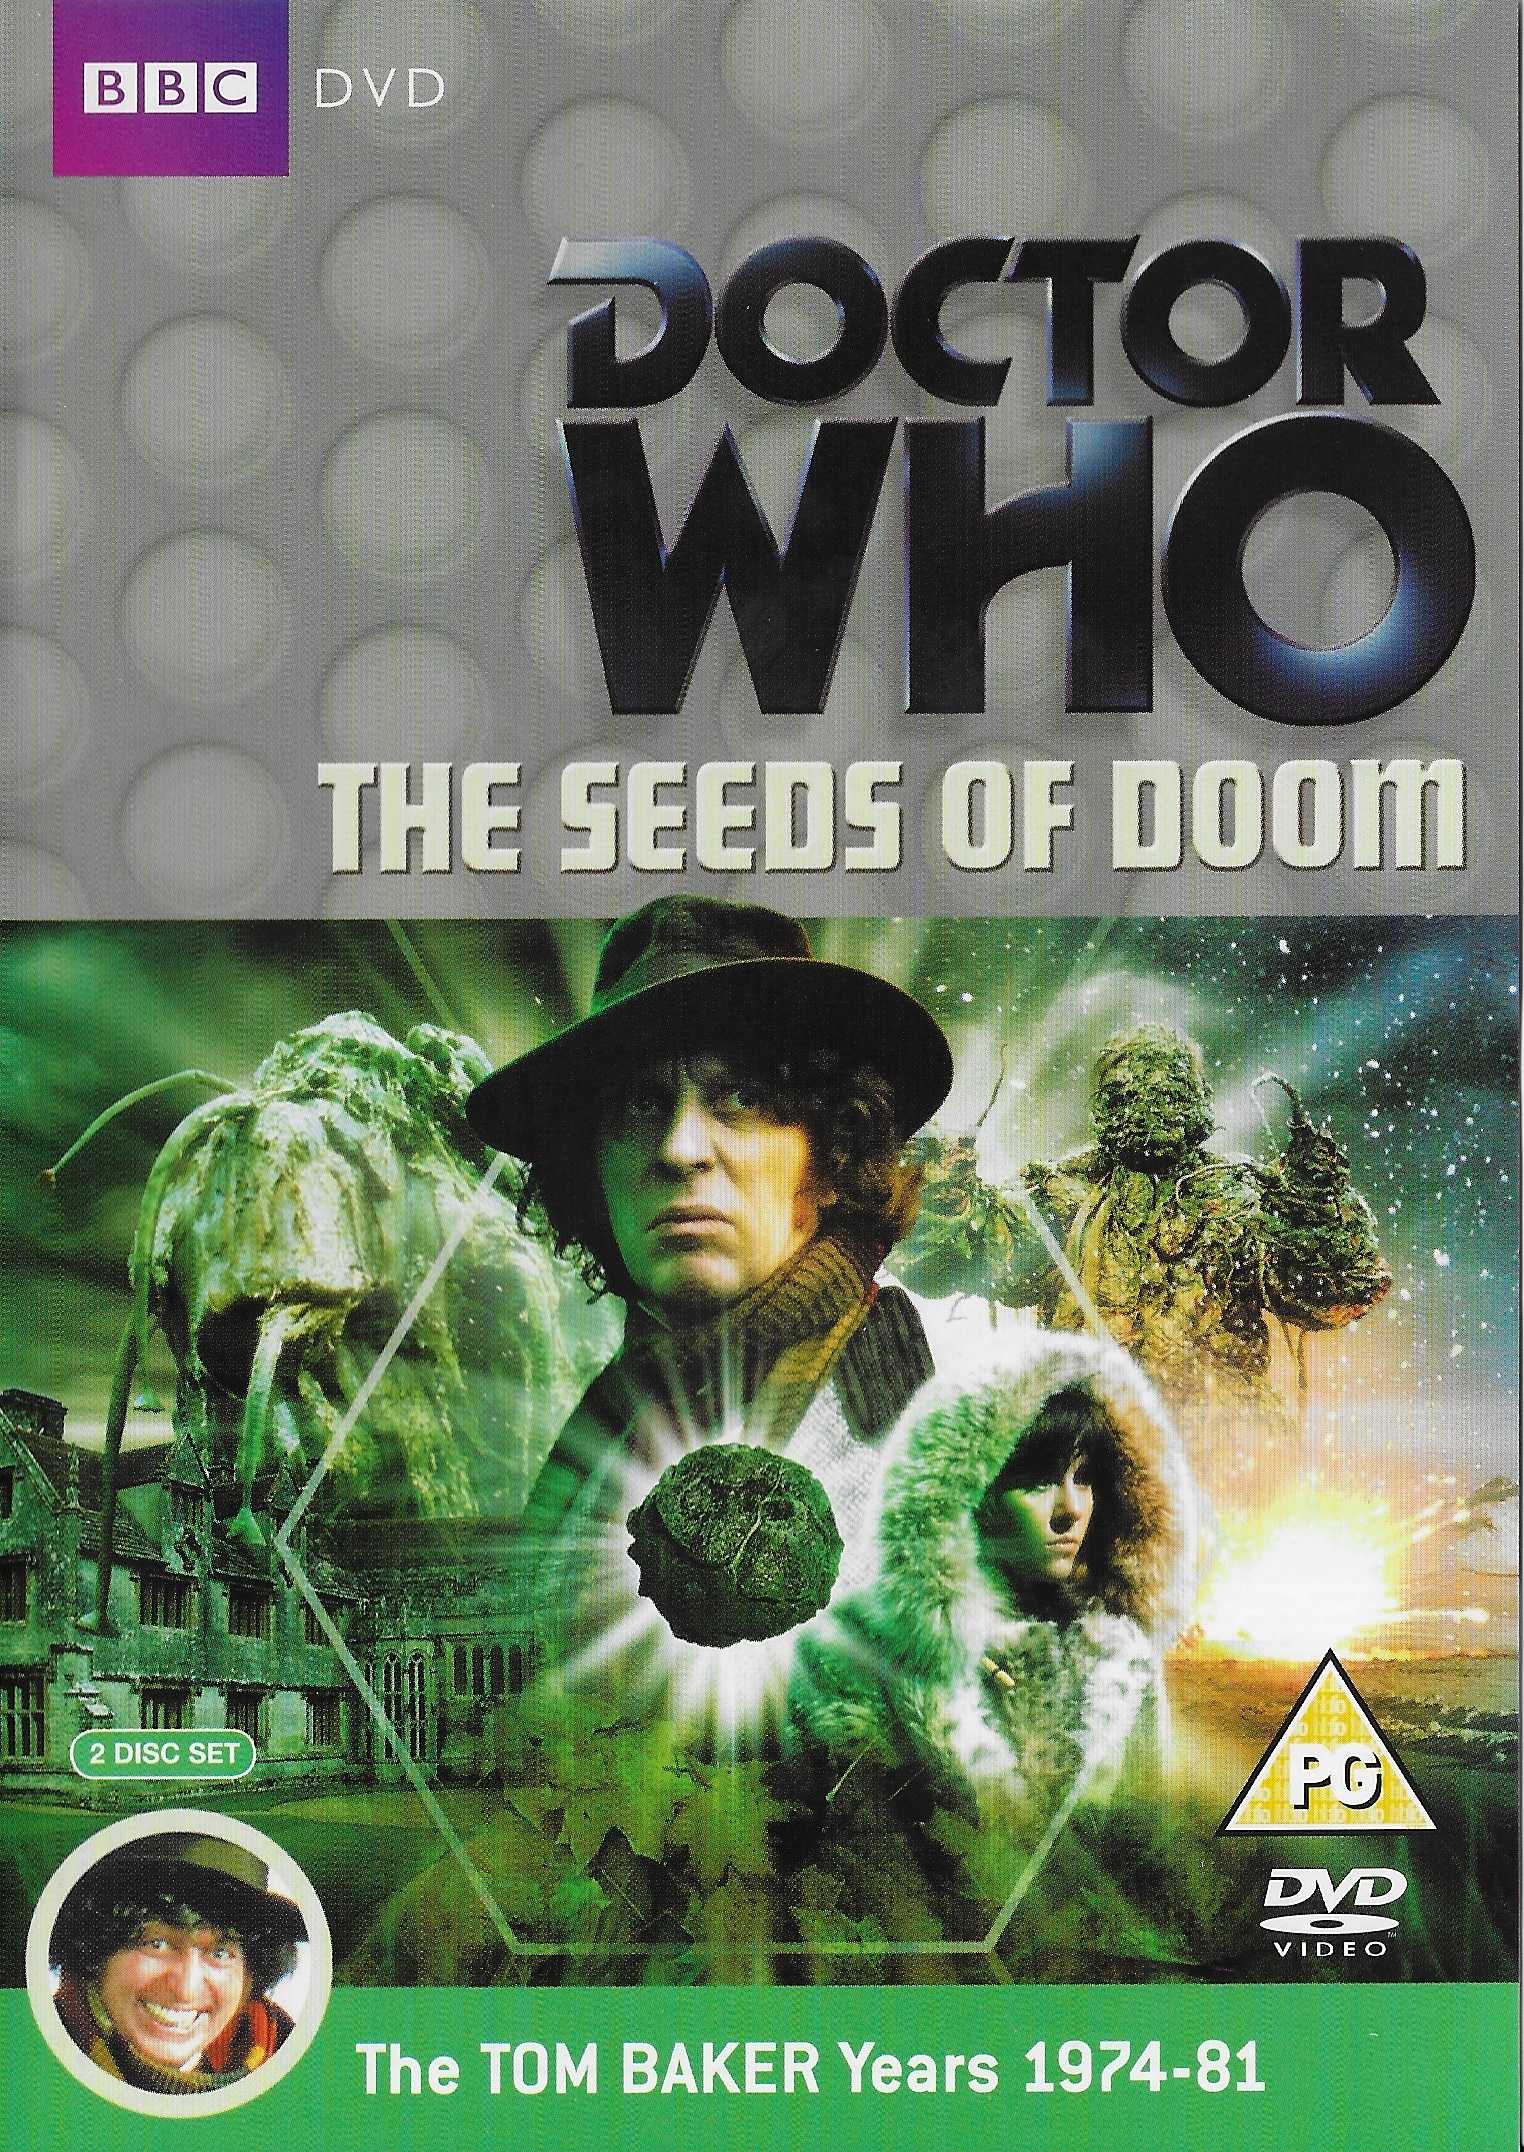 Picture of BBCDVD 3044 Doctor Who - The seeds of doom by artist Robert Banks Stewart from the BBC dvds - Records and Tapes library